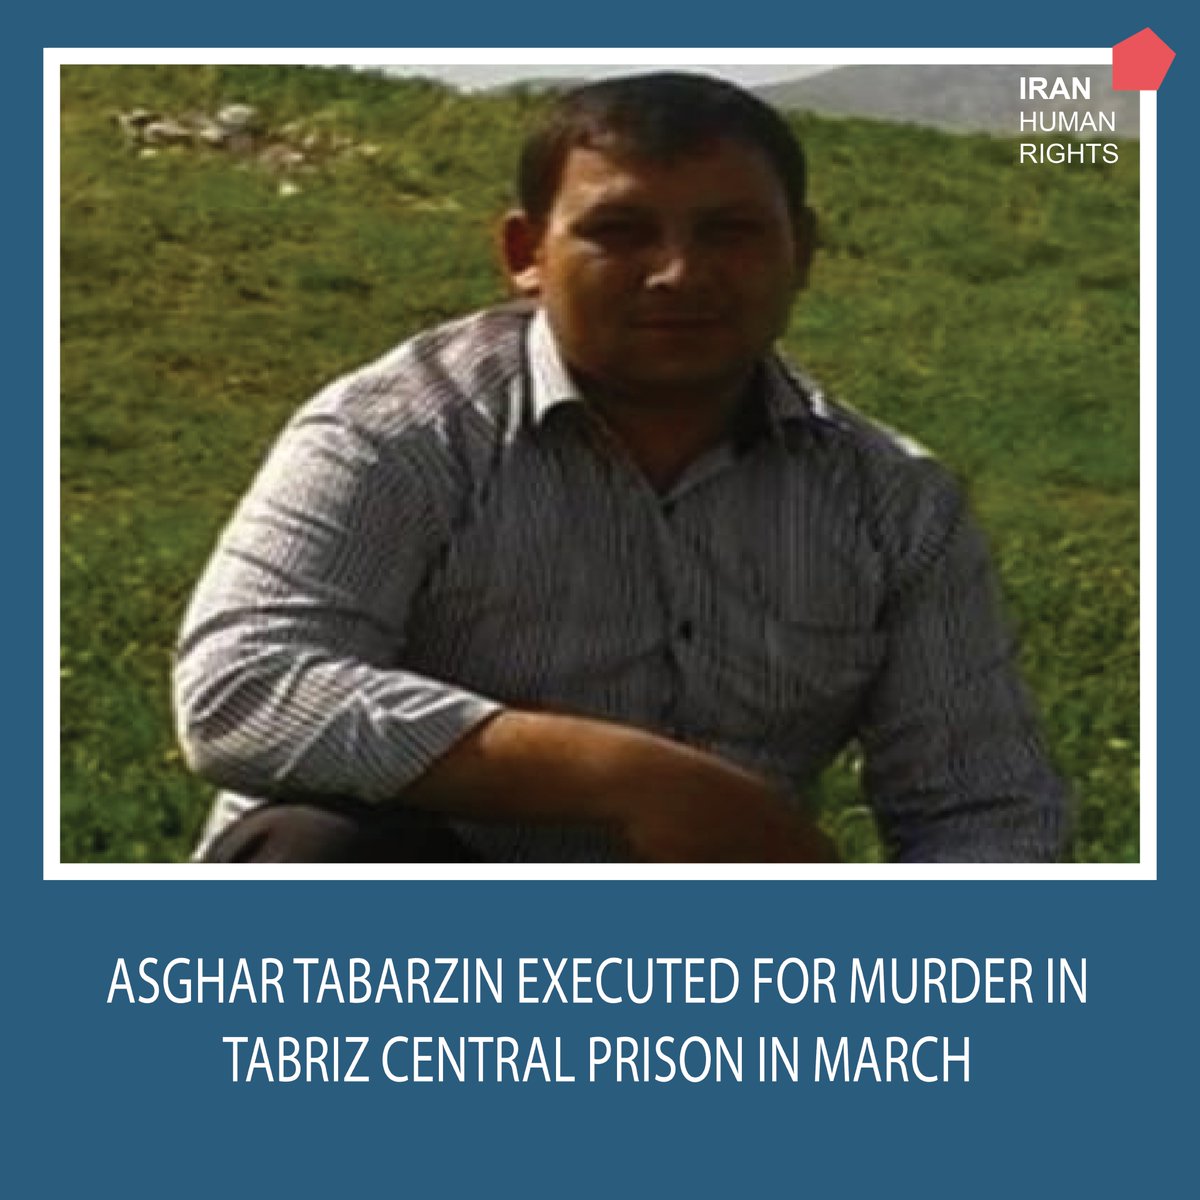 #Iran: Asghar Tabarzin, a 34-year-old man from Hashtroud, was executed for murder charges in Tabriz Central Prison on 17 March. He was on death row for 3 years.

#StopExecutionsInIran
#NoDeathPenalty
iranhr.net/en/articles/66…